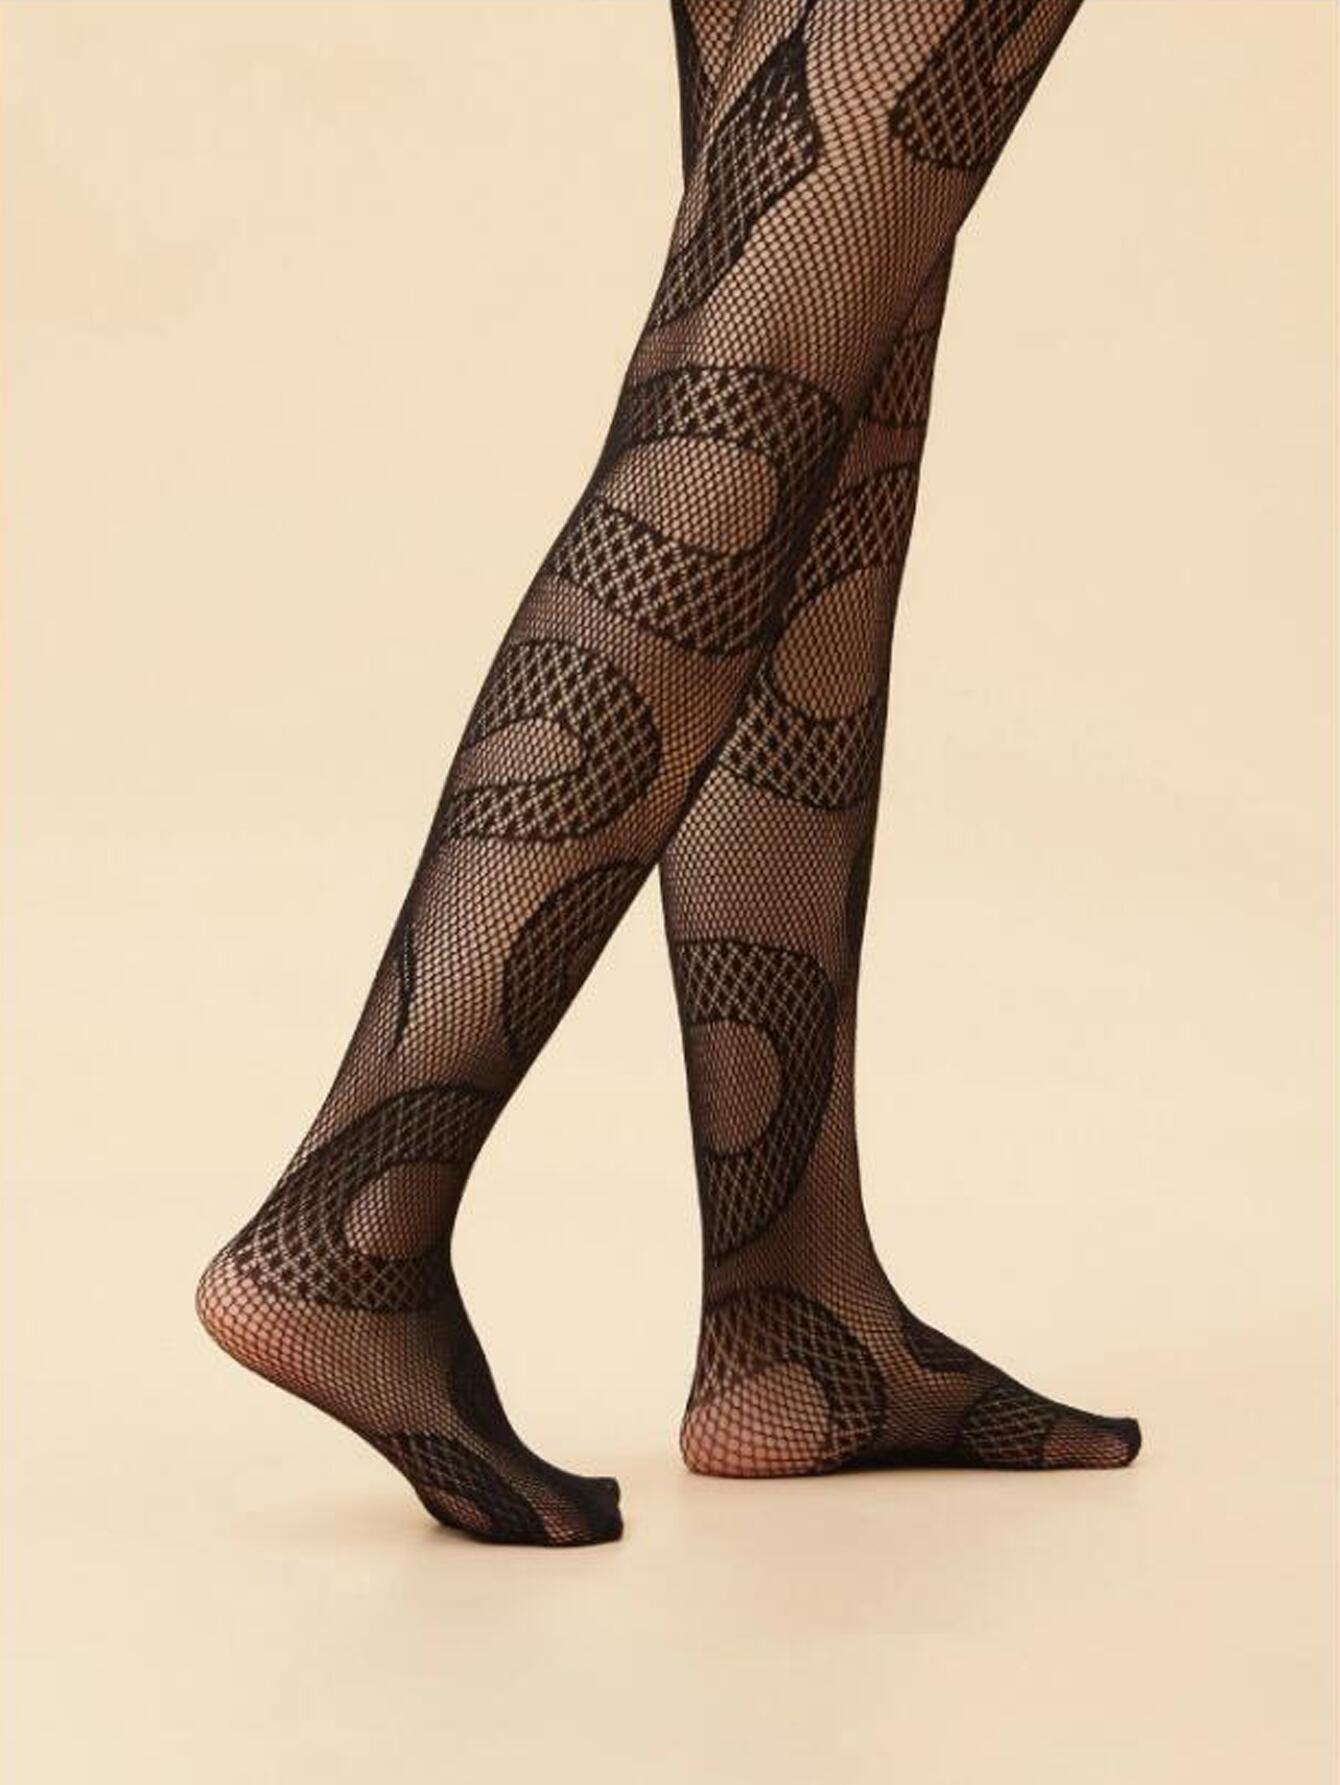 Cut-Out Mesh Women's Stockings with Animal Designs – Fun & Stylish - ForVanity lingerie accessories, Pantyhose & Stockings, women's lingerie Stockings